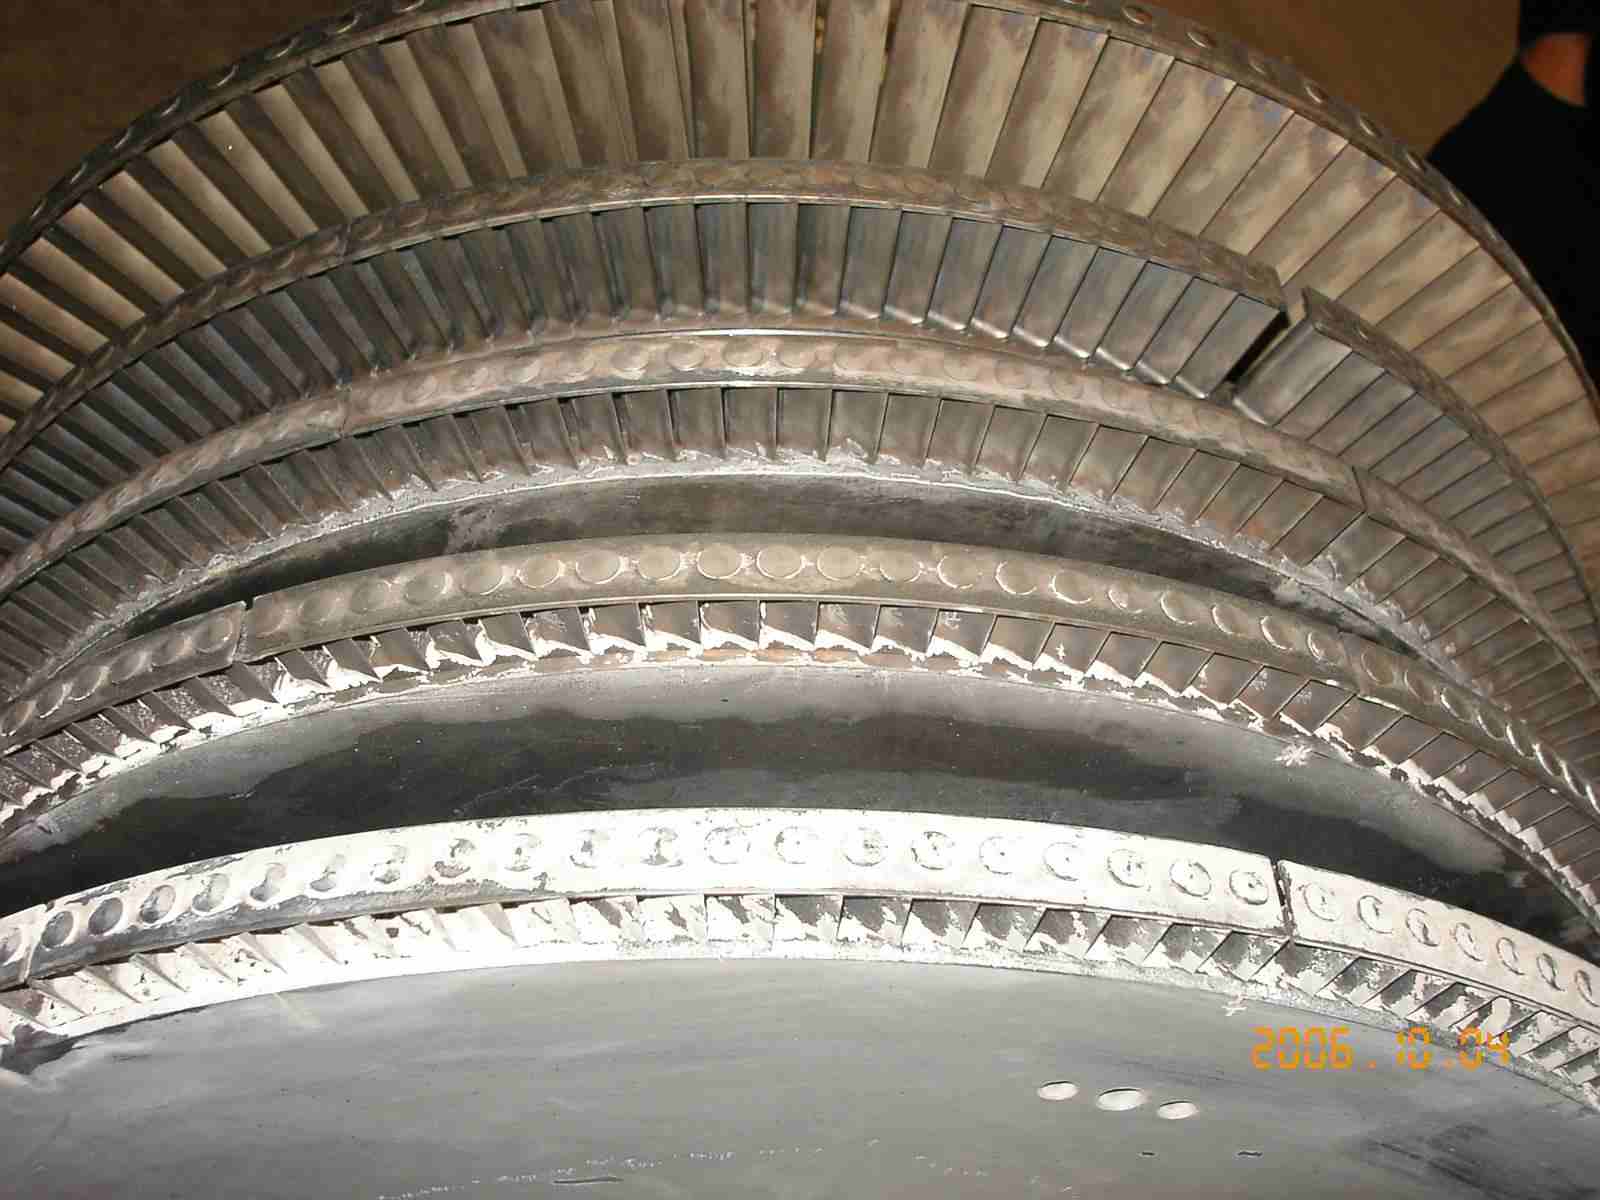 Fouled Turbine Blades and Discs